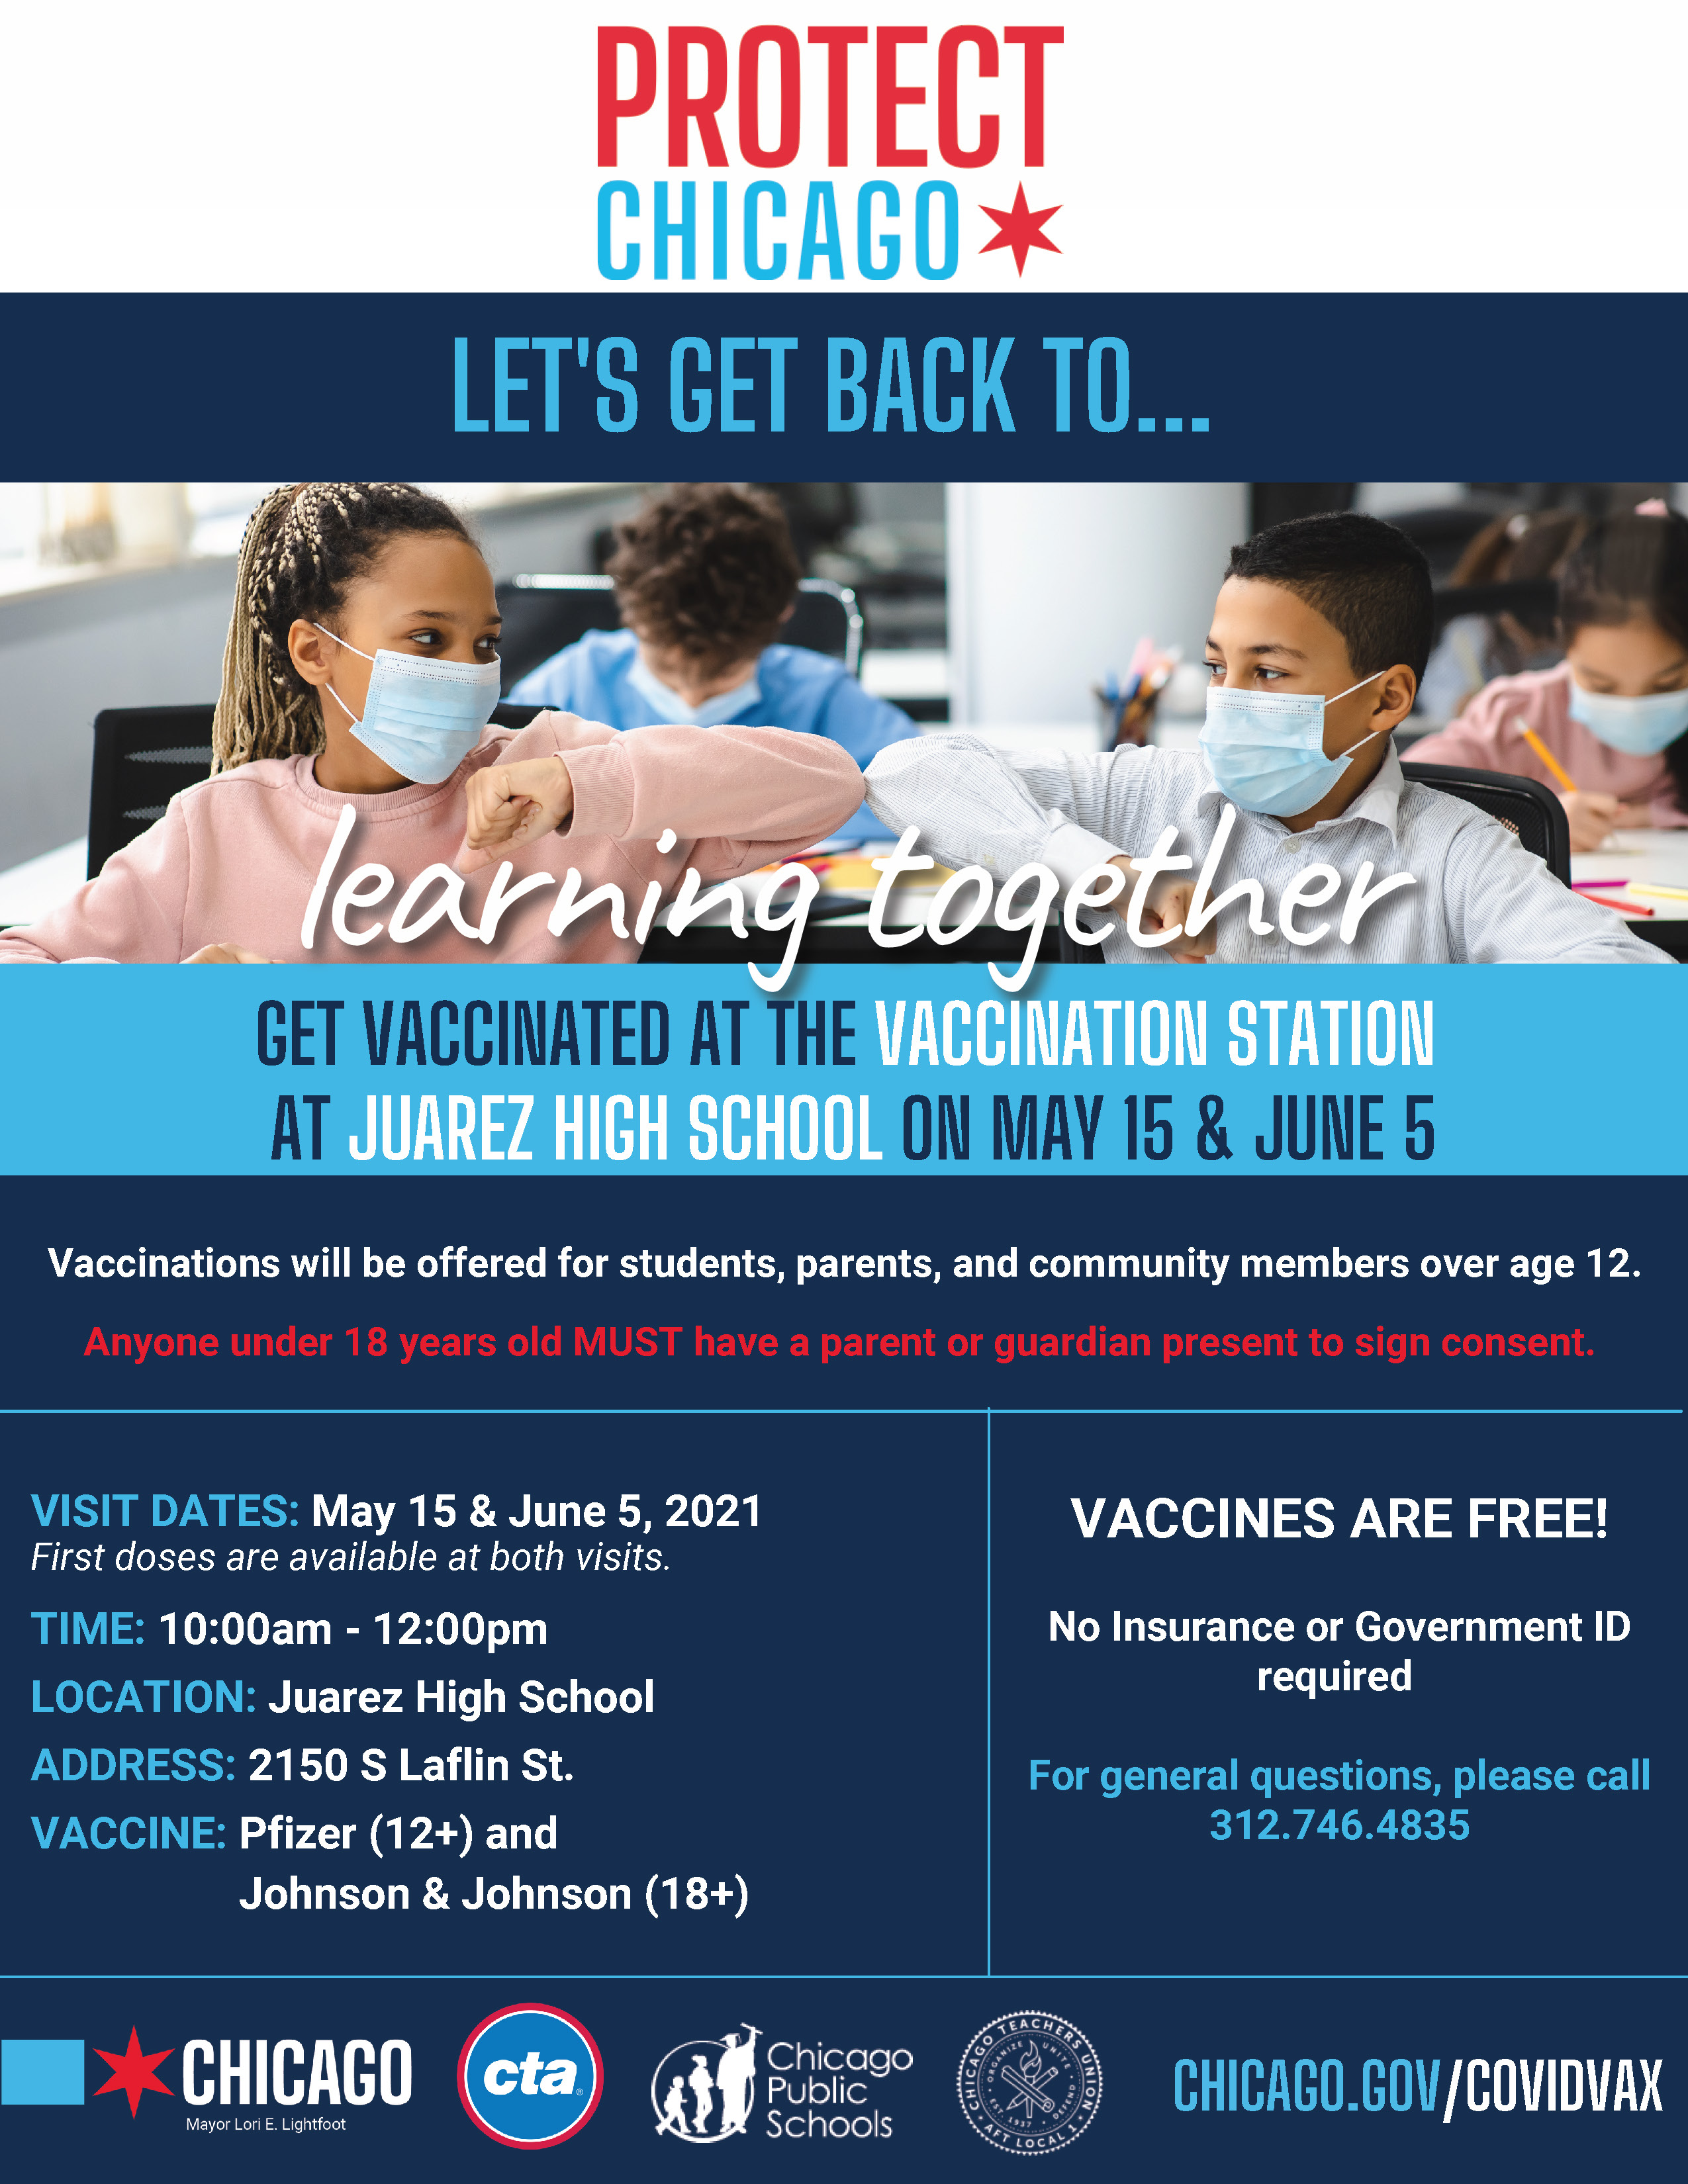 Vaccination events at CPS schools